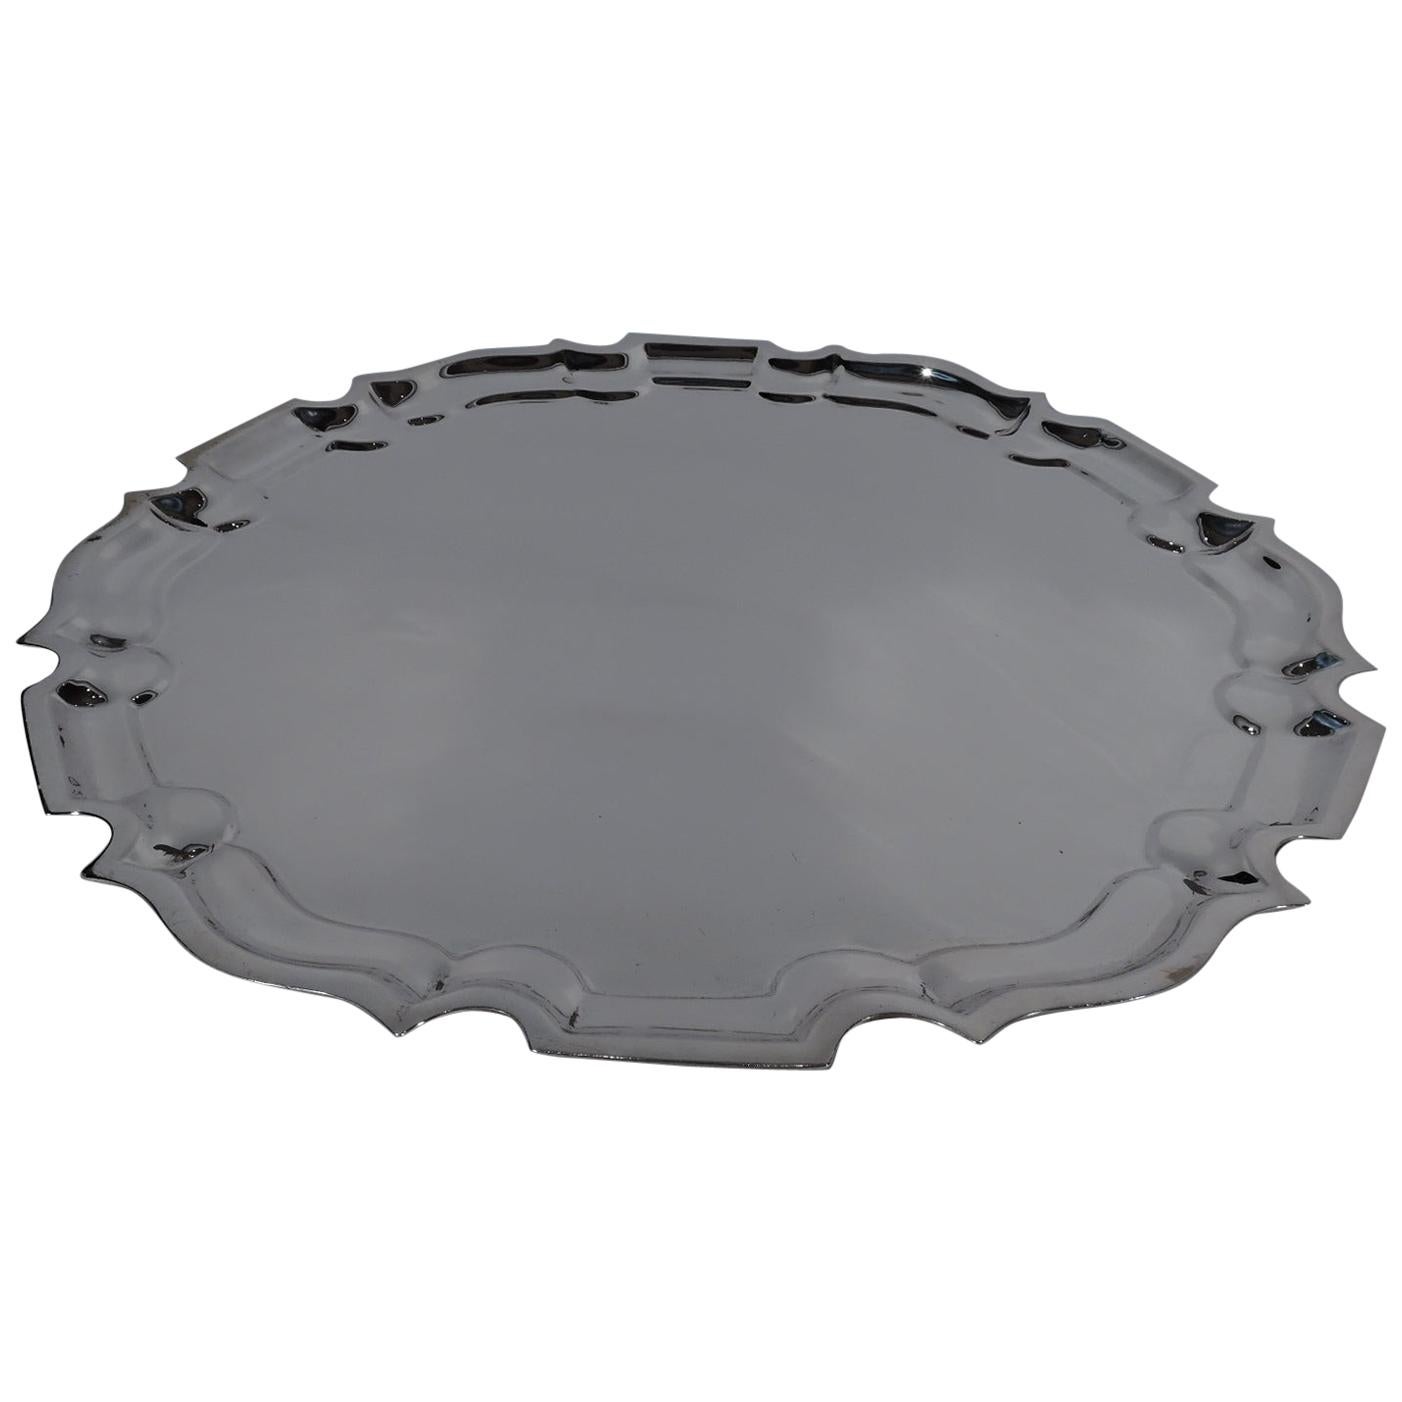 Large Cartier Sterling Silver Serving Tray with Georgian Piecrust Rim